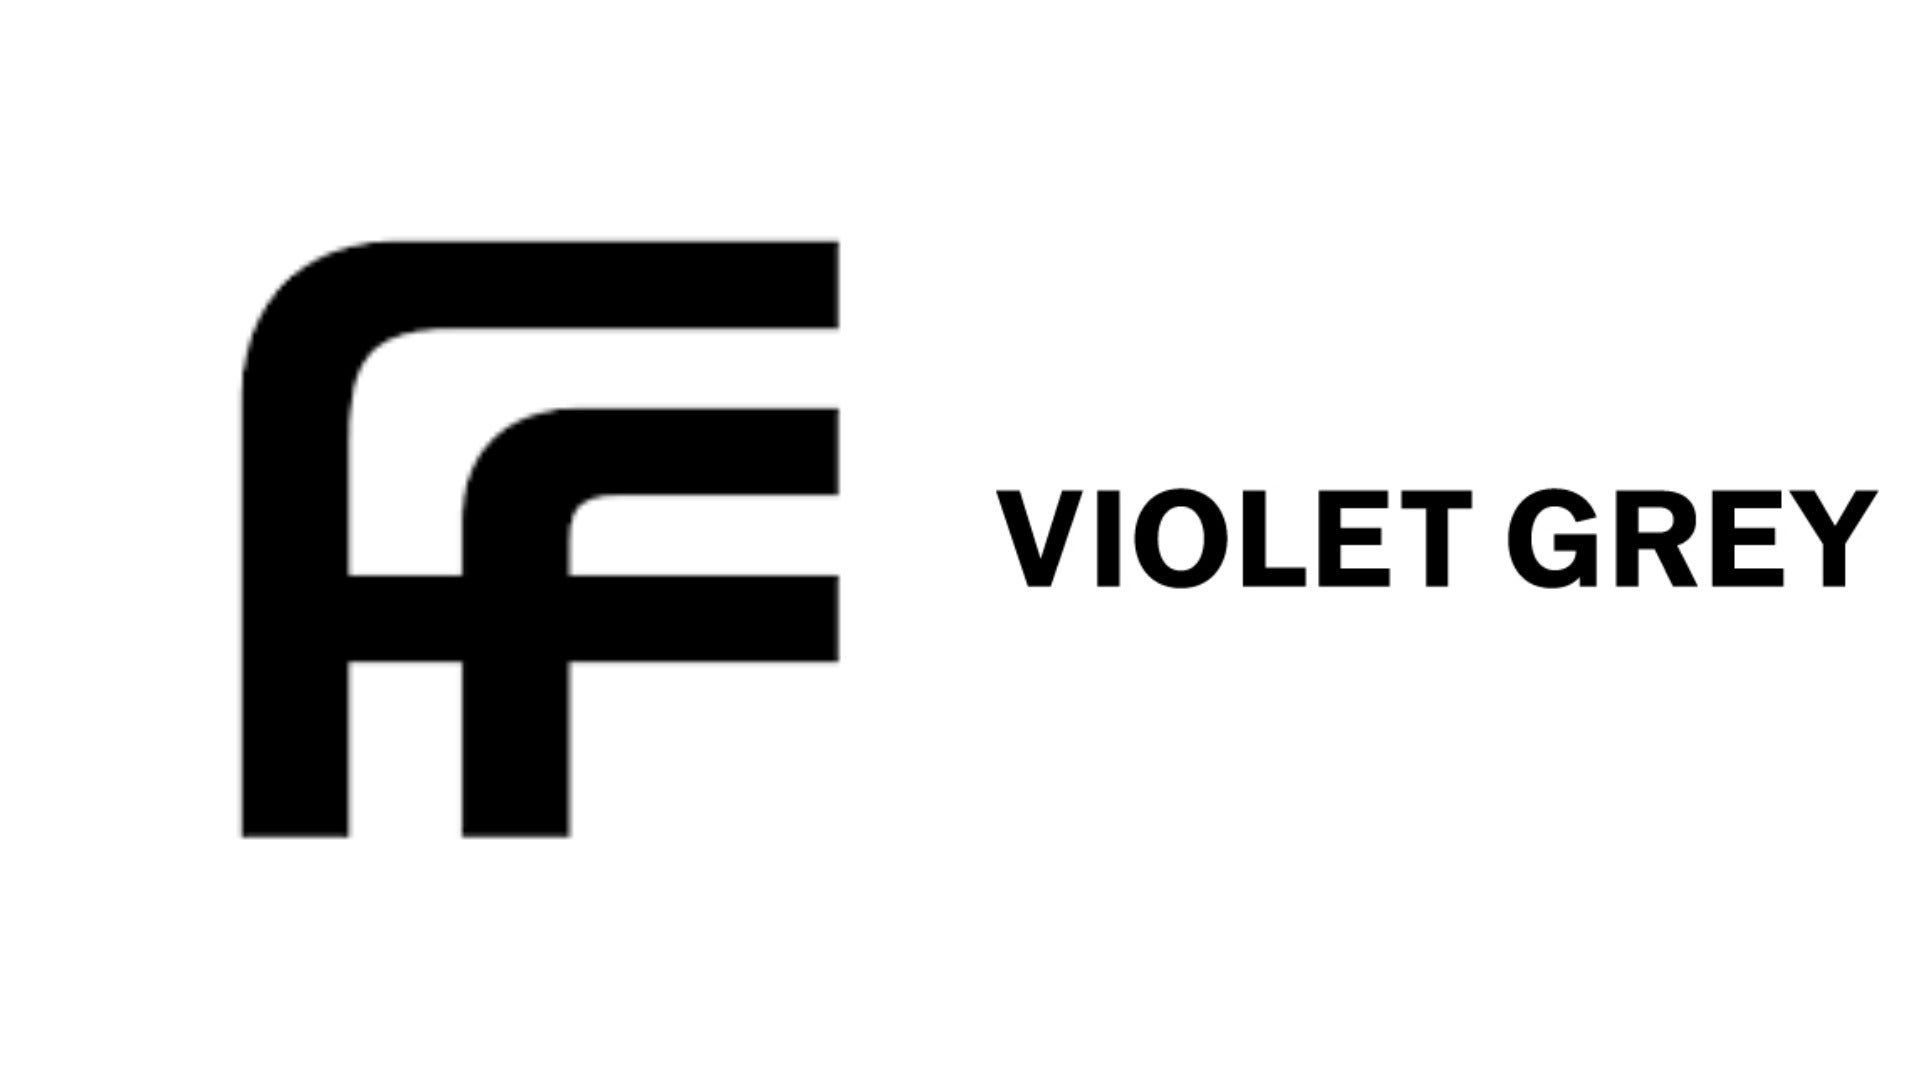 FARFETCH Is Acquiring Violet Grey As The Marketplace Expands Into Beauty